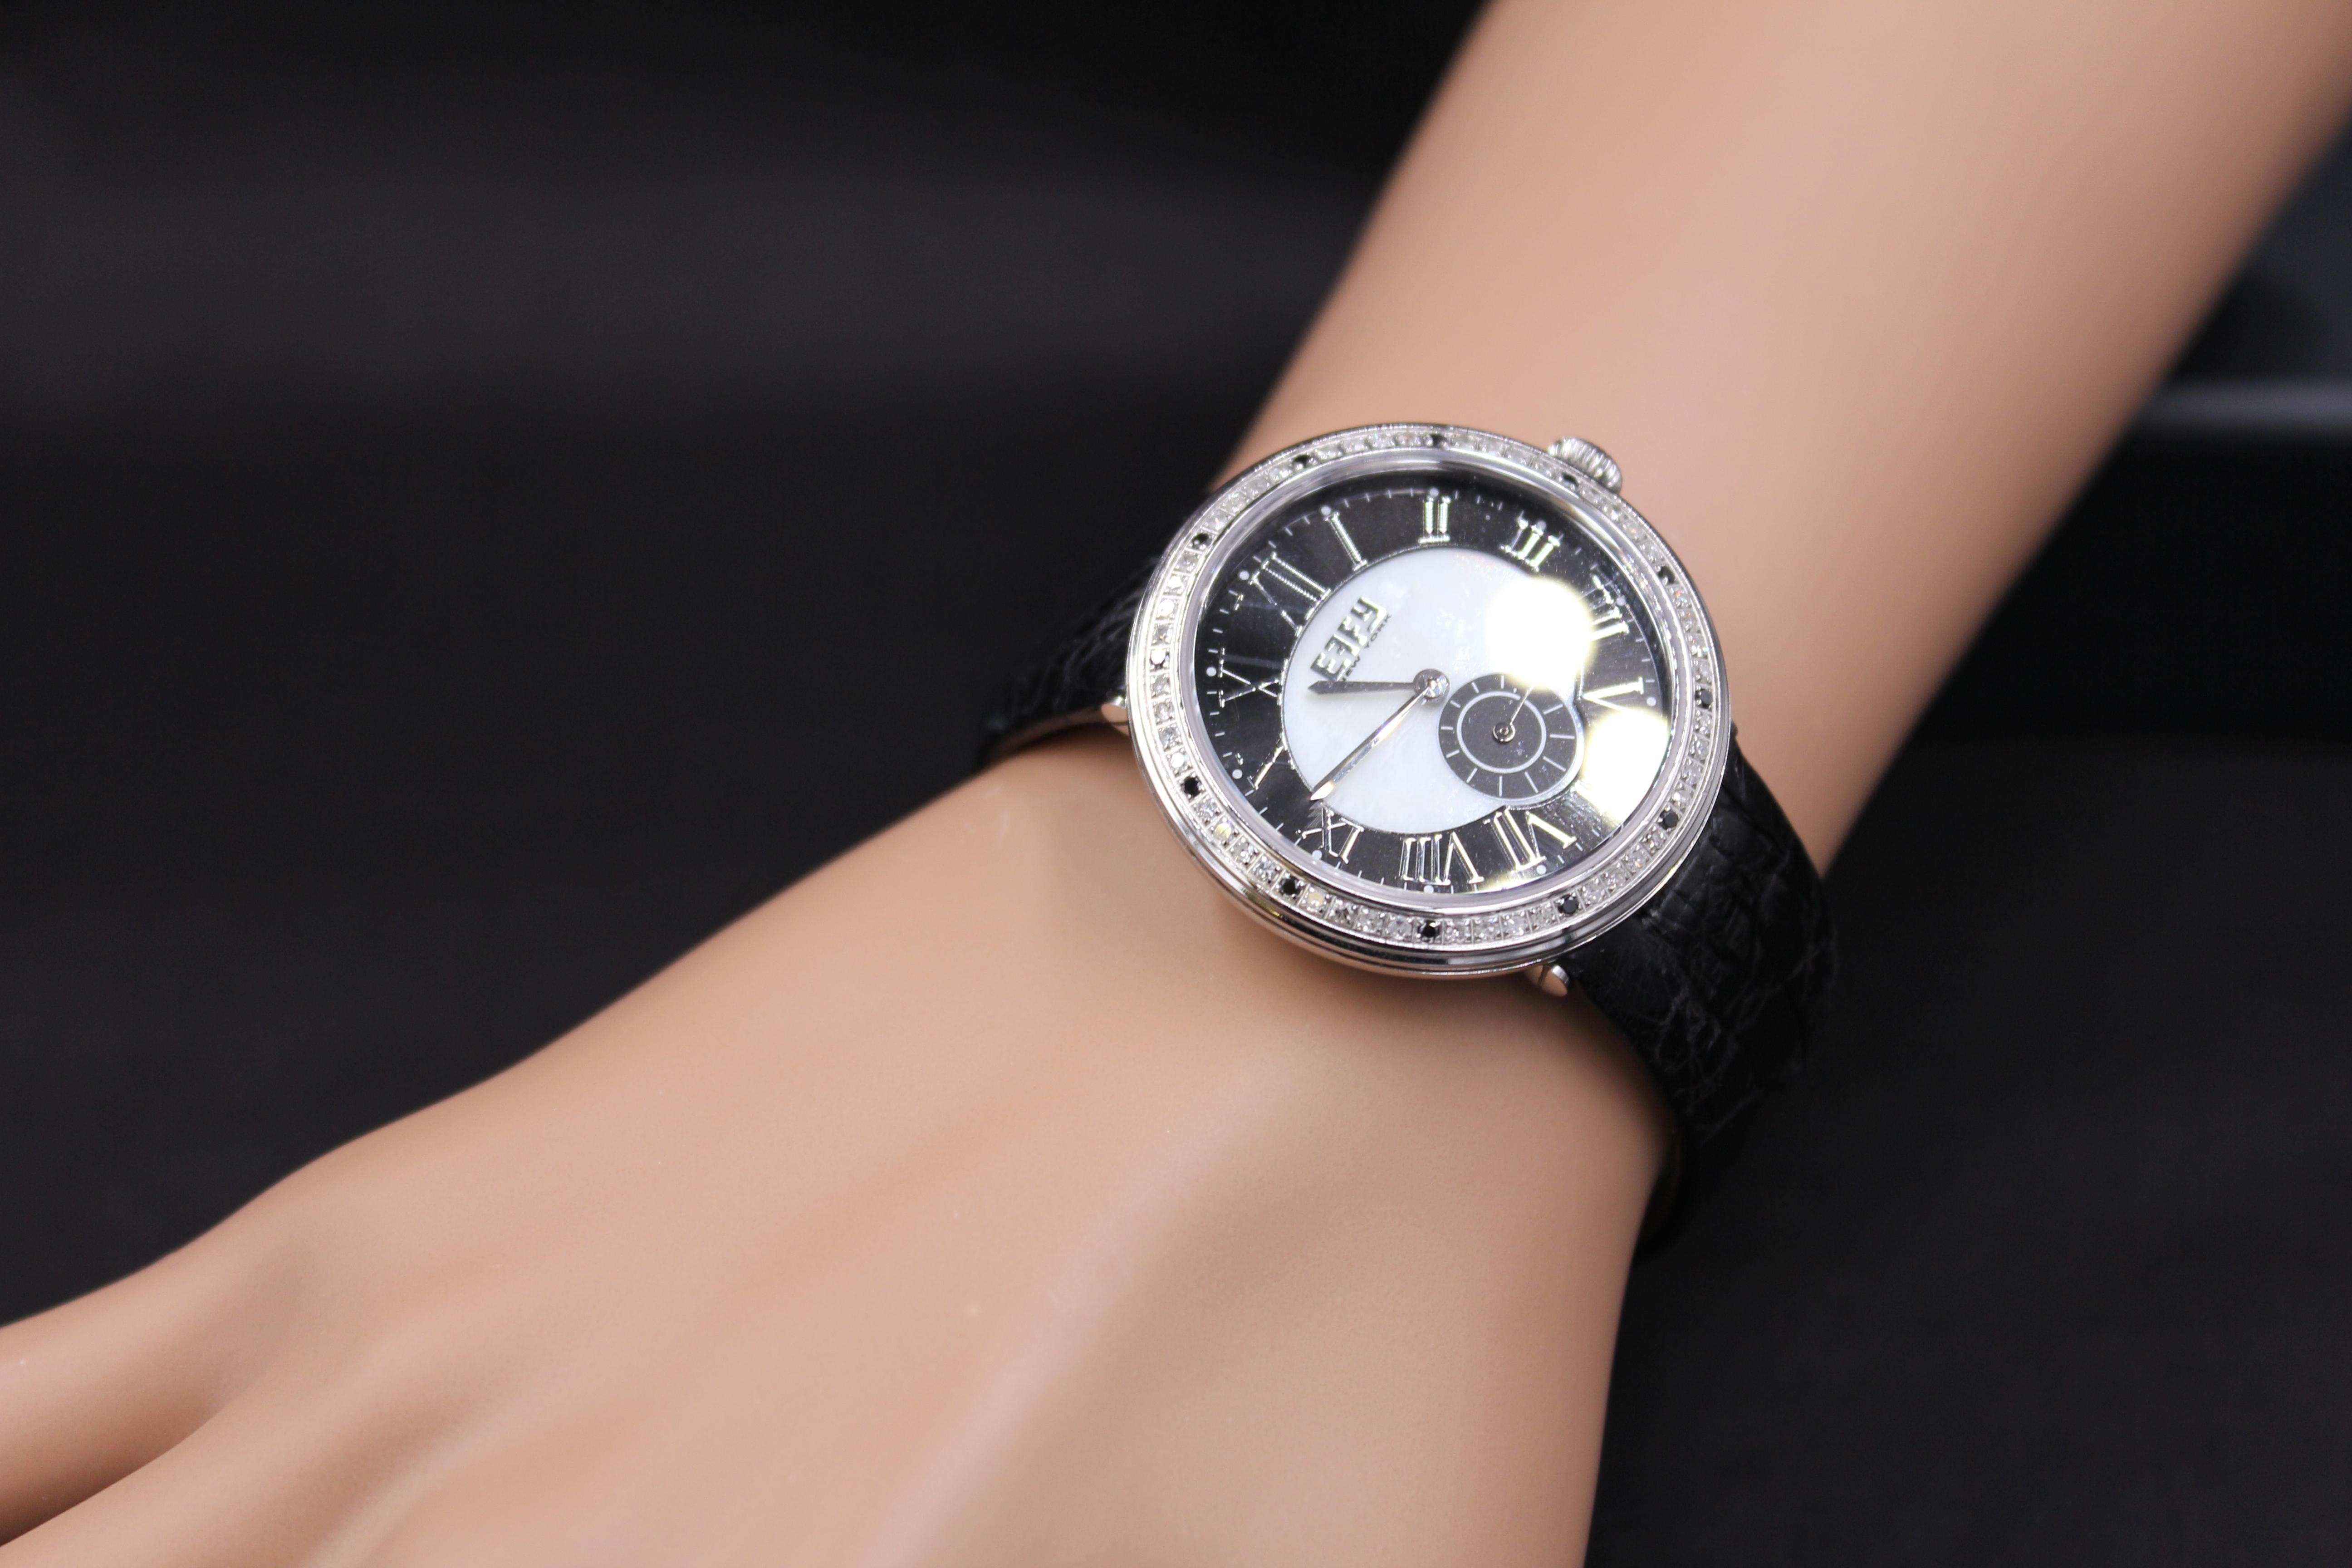 ·  Quality Swiss-Quartz movement guarantees precision timing
·         Mother-of-Pearl dial micro-paved with diamonds and gemstones enhances any dress style
·         Scratch-resistant sapphire glass lens
·         Genuine exotic leather strap or